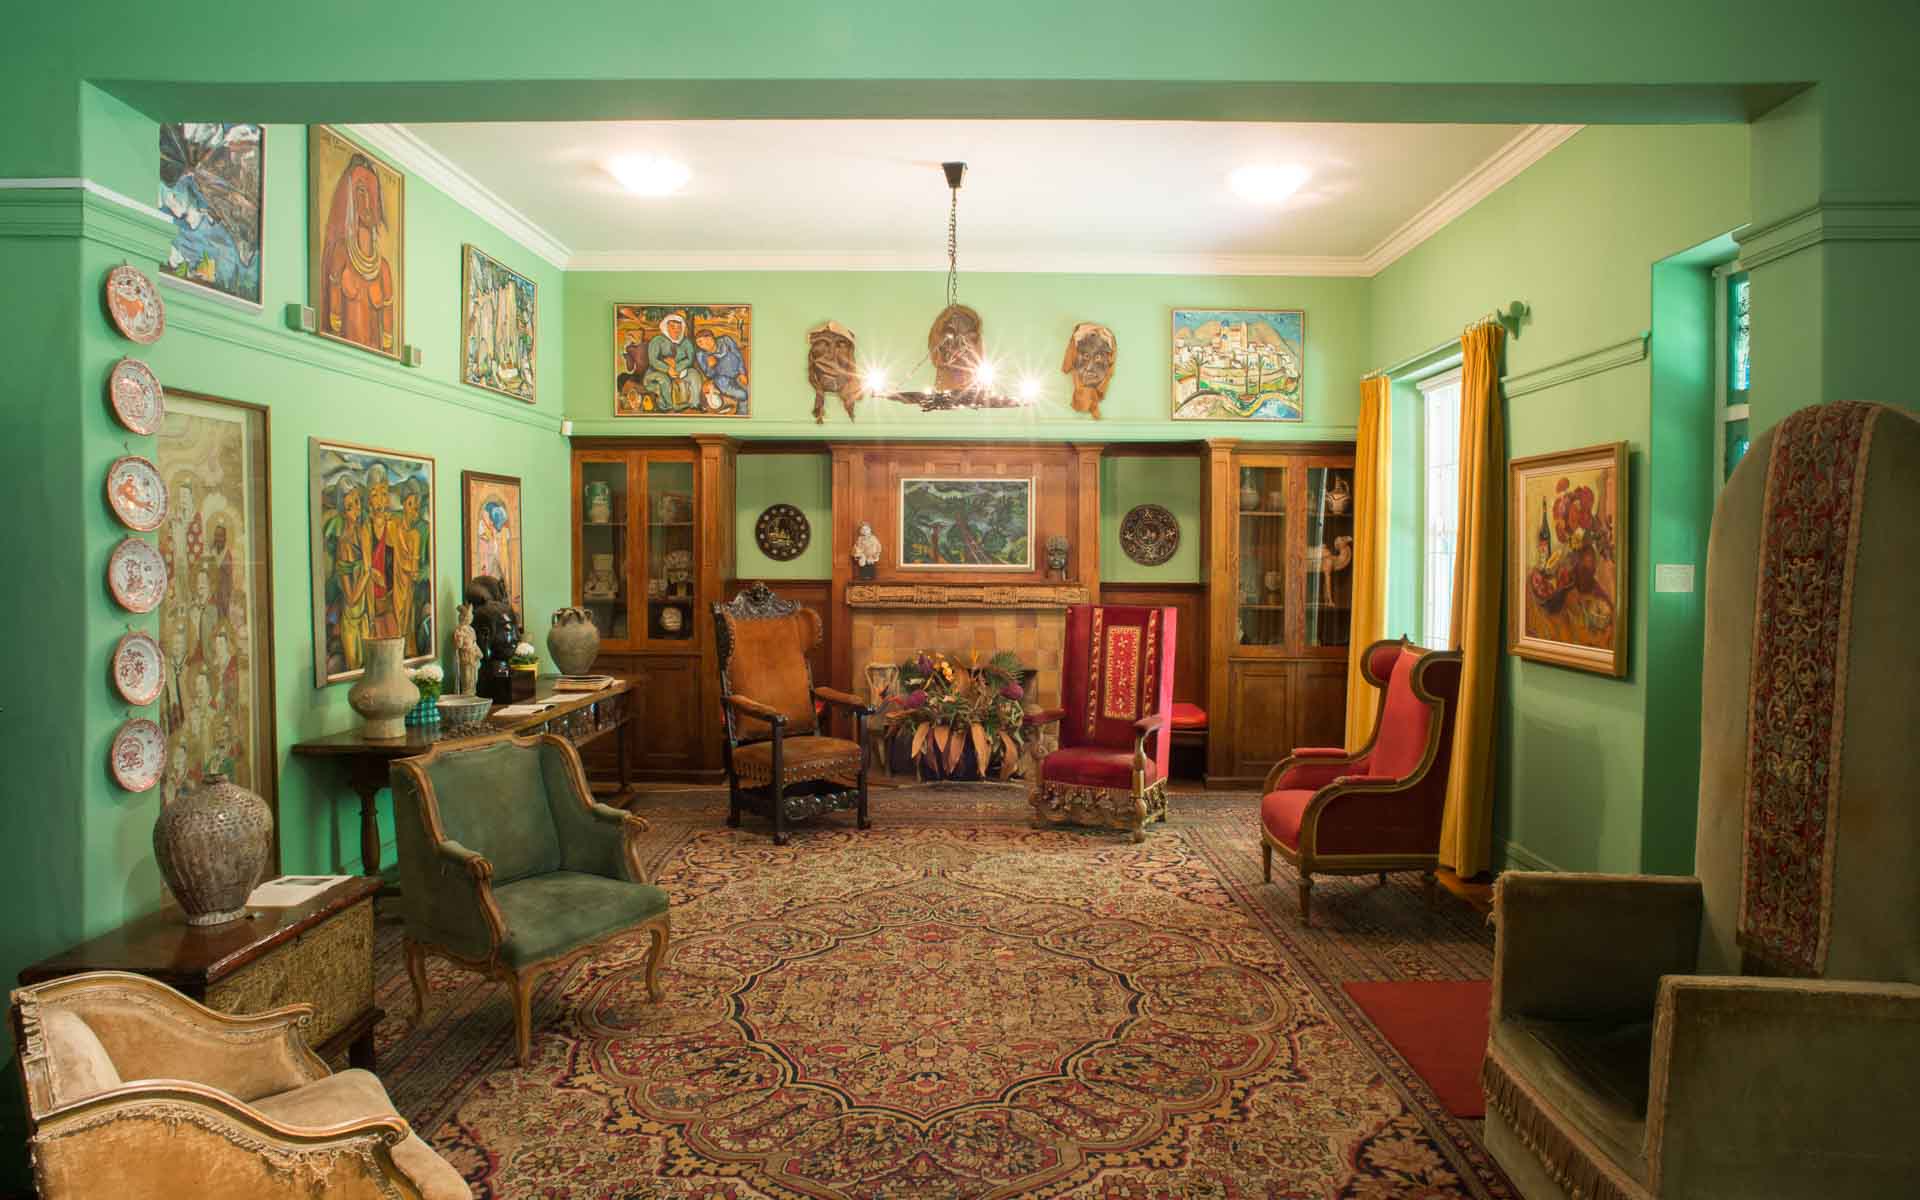 Artworks and eccentric furnishings in the lounge of the late artist, Irma Stern – a glimpse into one of the top art galleries in Cape Town.